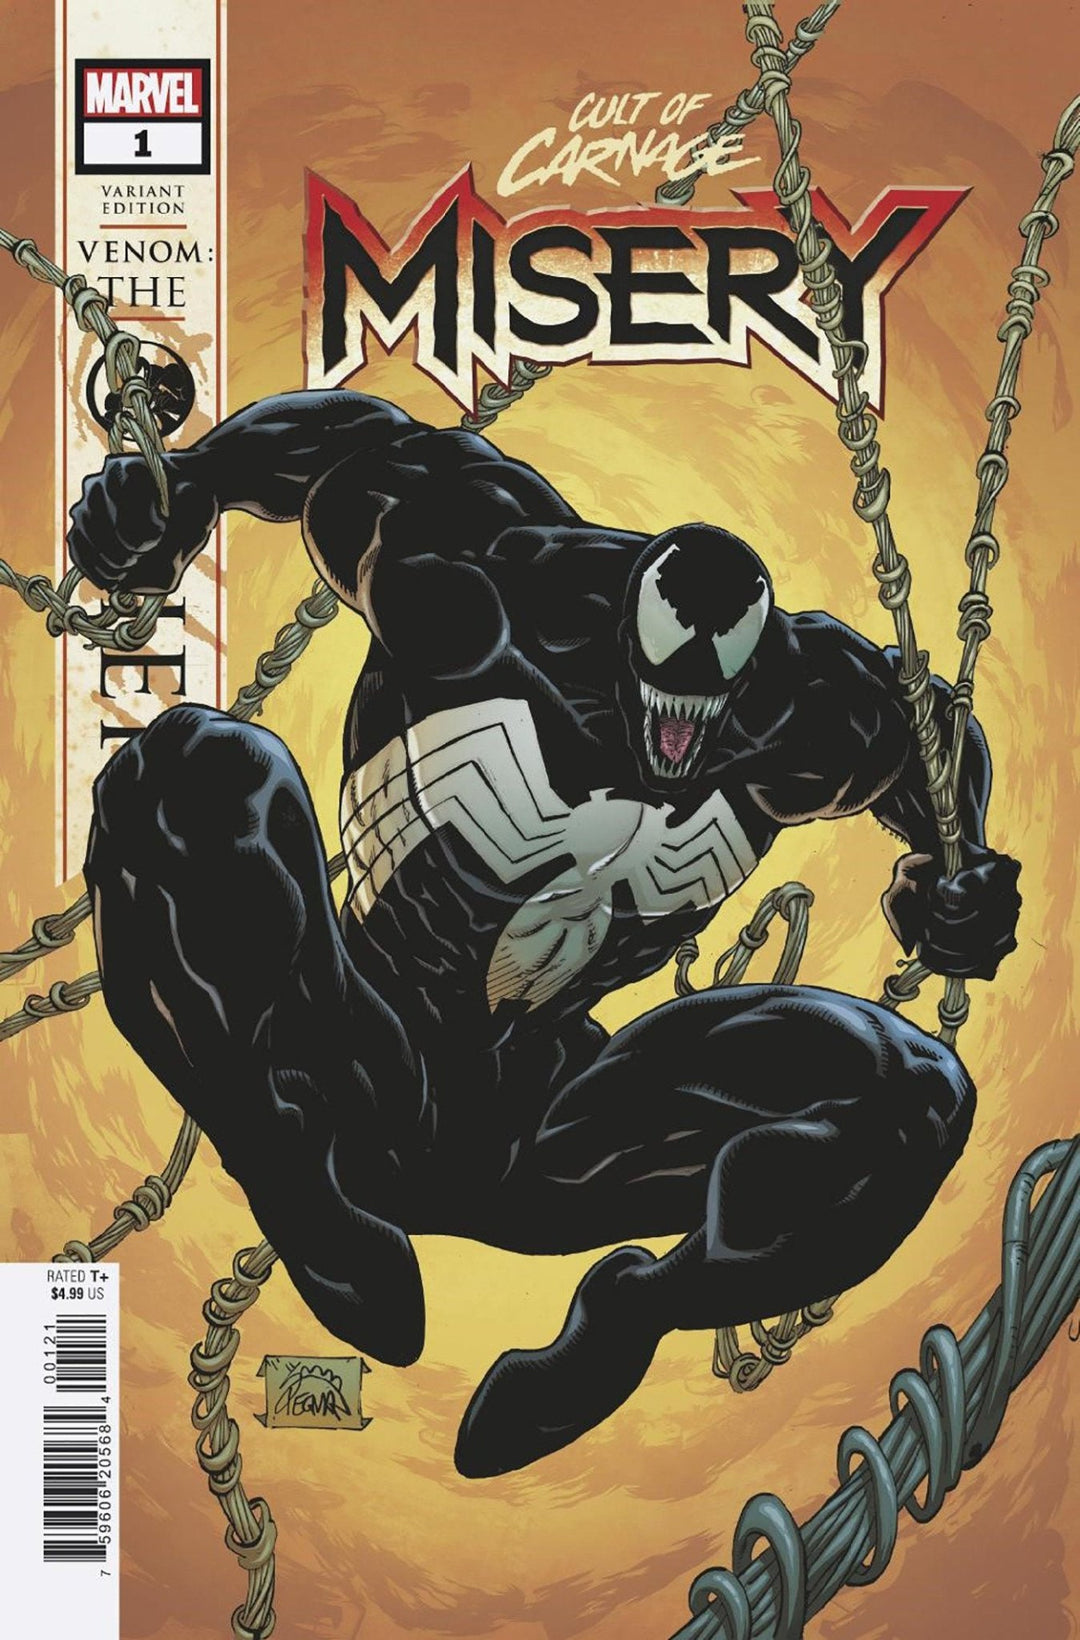 Cult Of Carnage: Misery 1 Ryan Stegman Venom The Other Variant - gabescaveccc